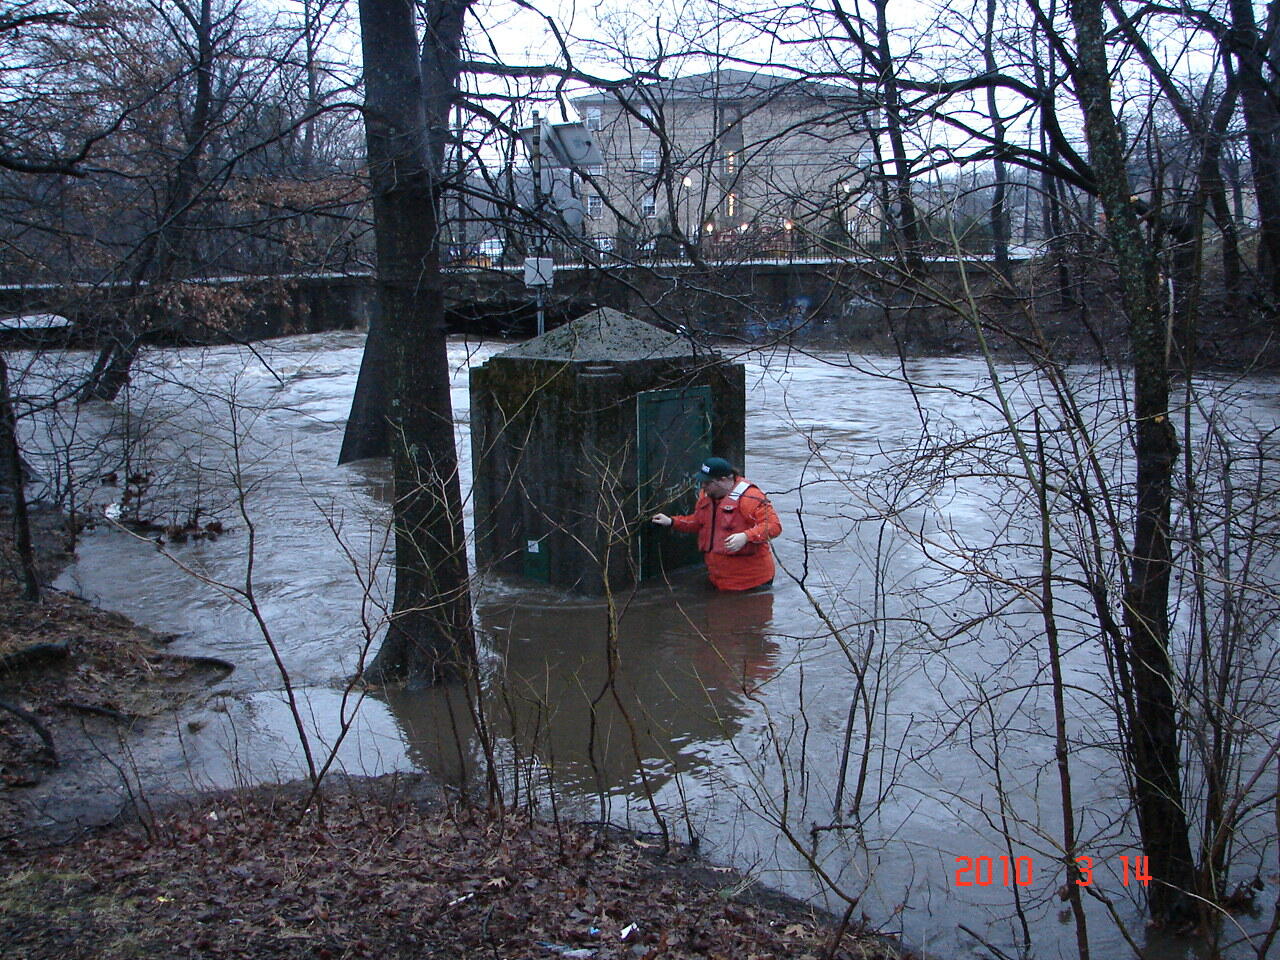 Hydrographer Wading into floodwaters to reach a gage